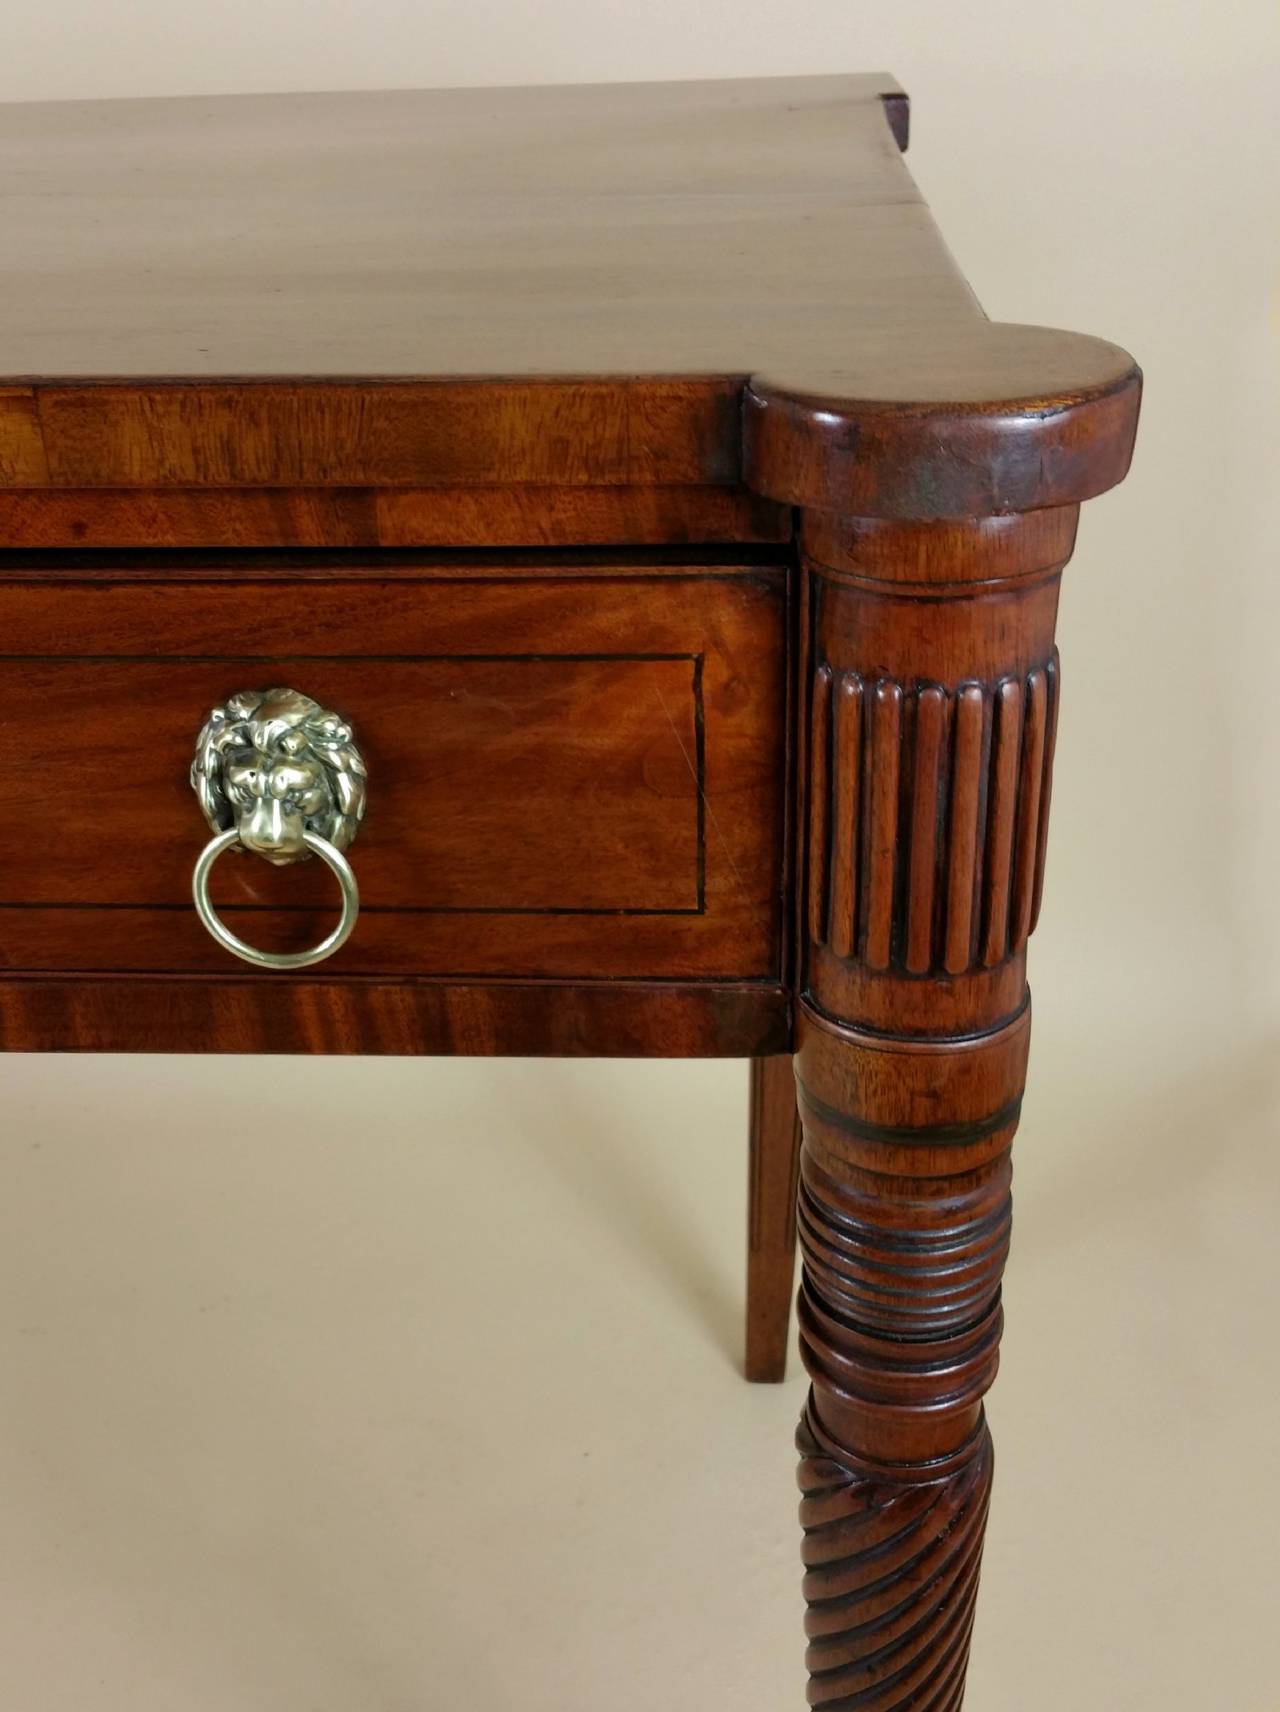 A very well proportioned and handsome Regency mahogany serving table that features a breakfront design with 3 top drawers. The table displays brass inlaid decoration with lion head ring drawer pulls and escutcheons, and is supported on front rope